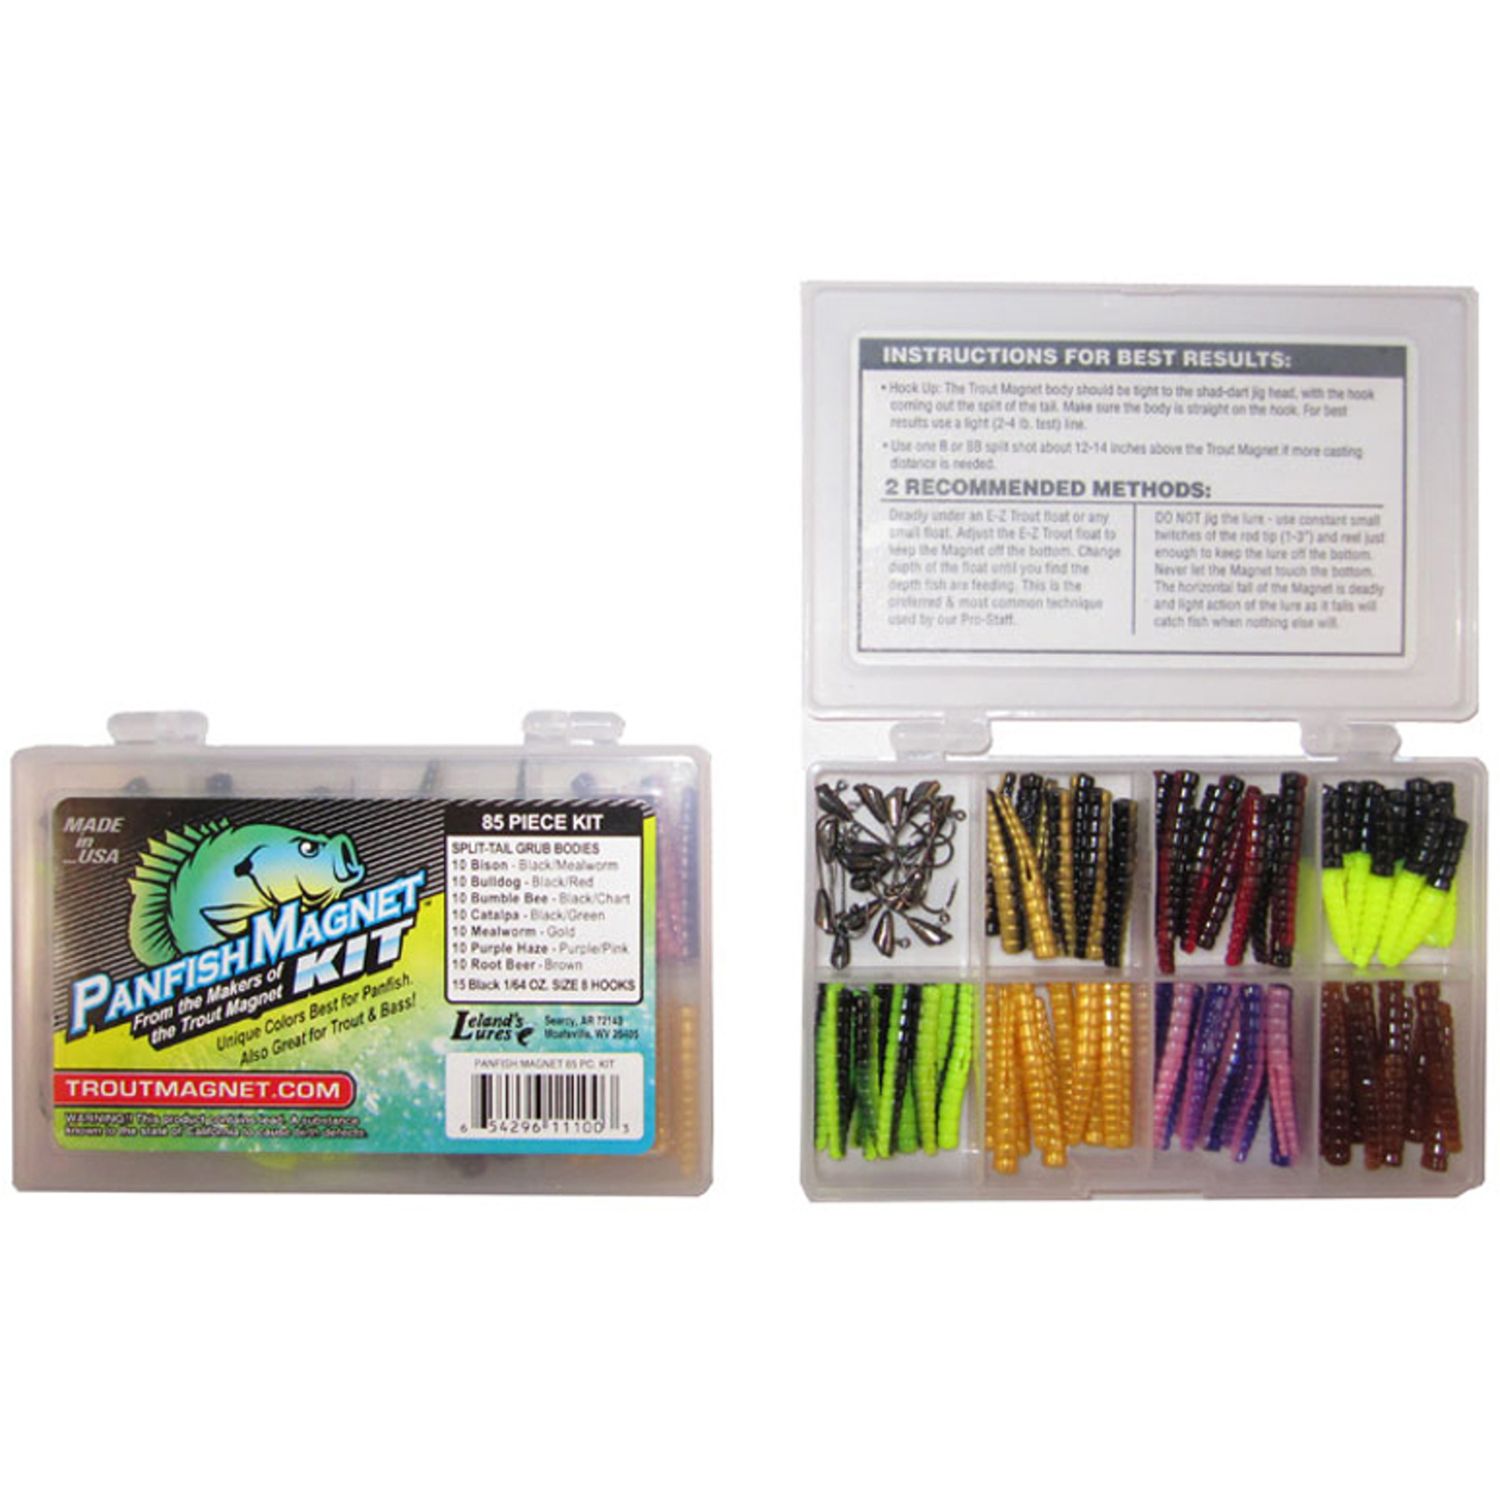 Dick's Sporting Goods Leland's Trout Magnet 85-Piece Panfish Lure Kit